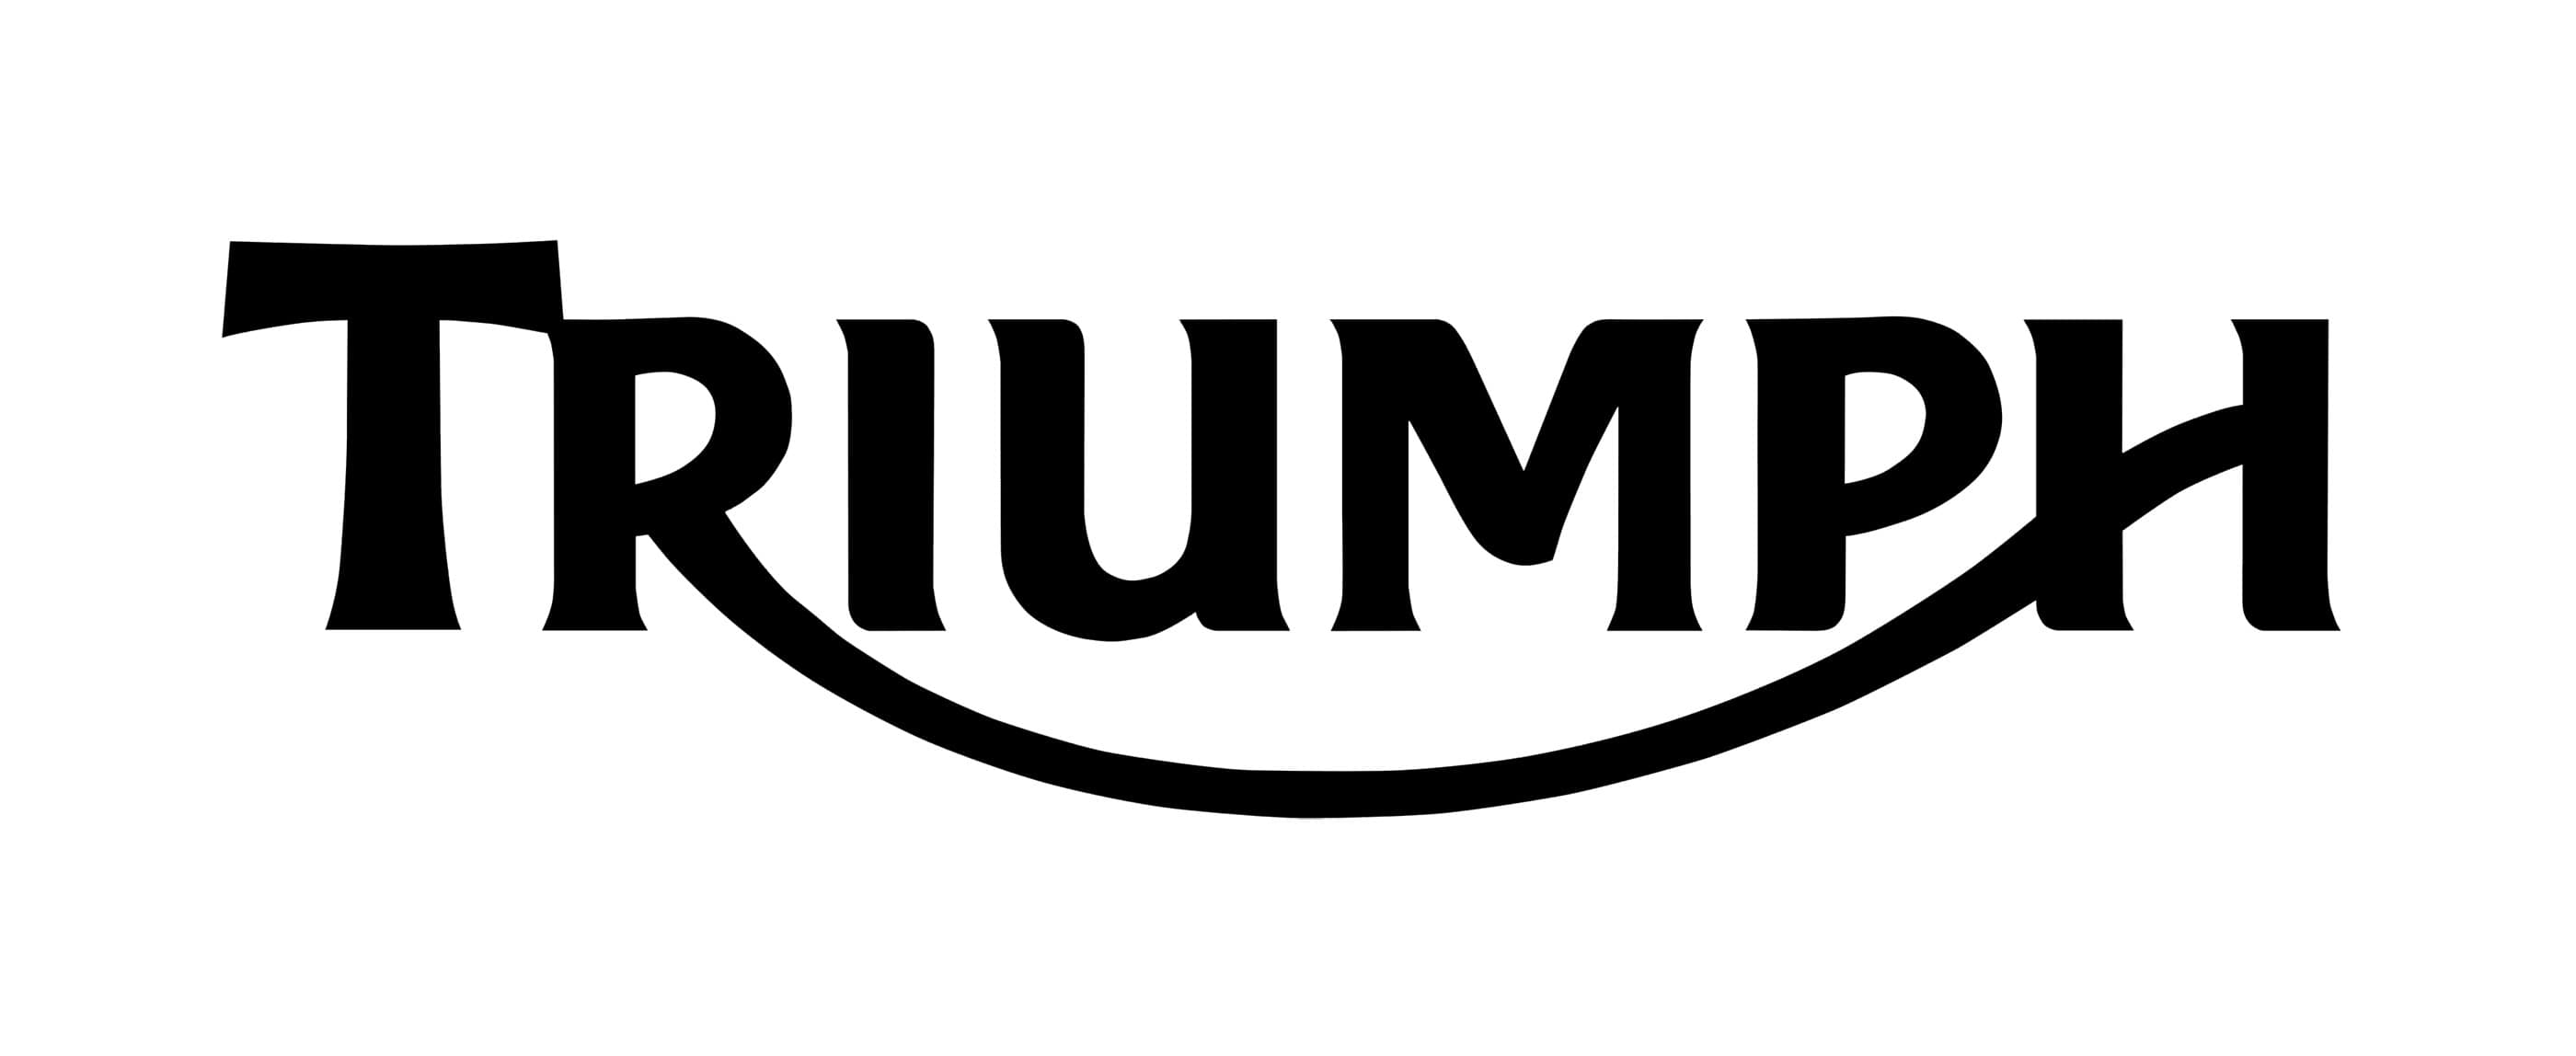 Triumph Logo - Triumph logo: history, evolution, meaning | Motorcycle Brands